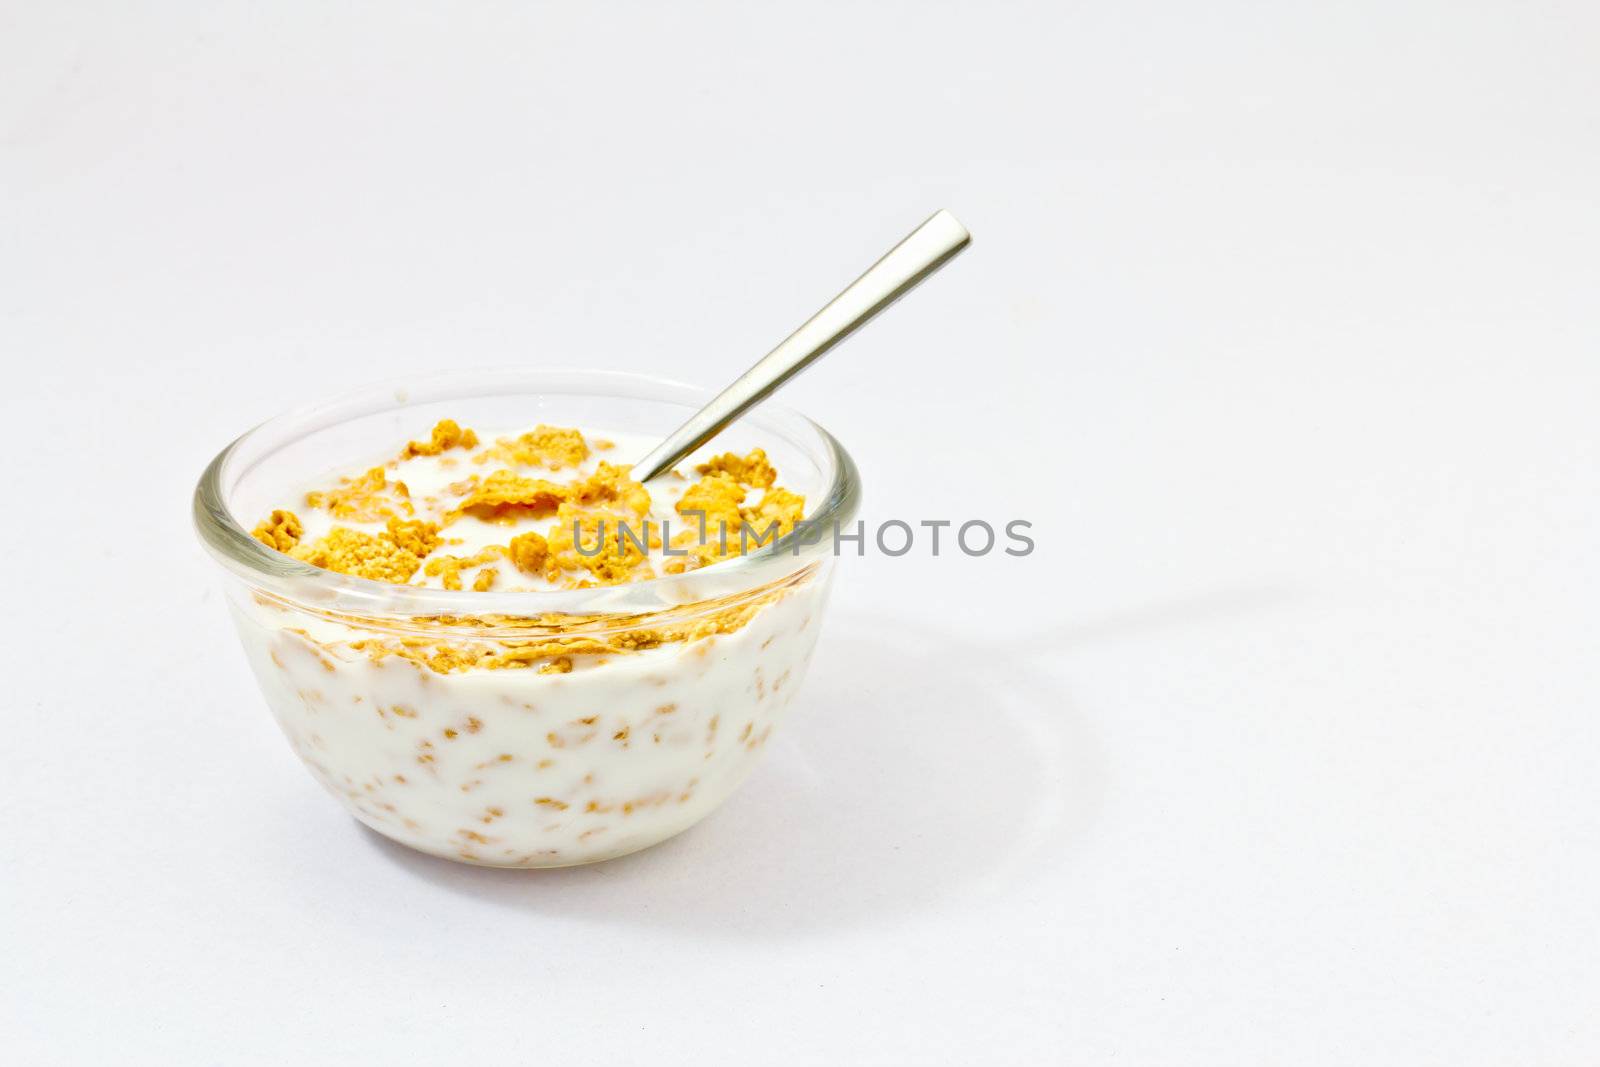 Corn flakes and milk in a bowl-healthy light breakfast